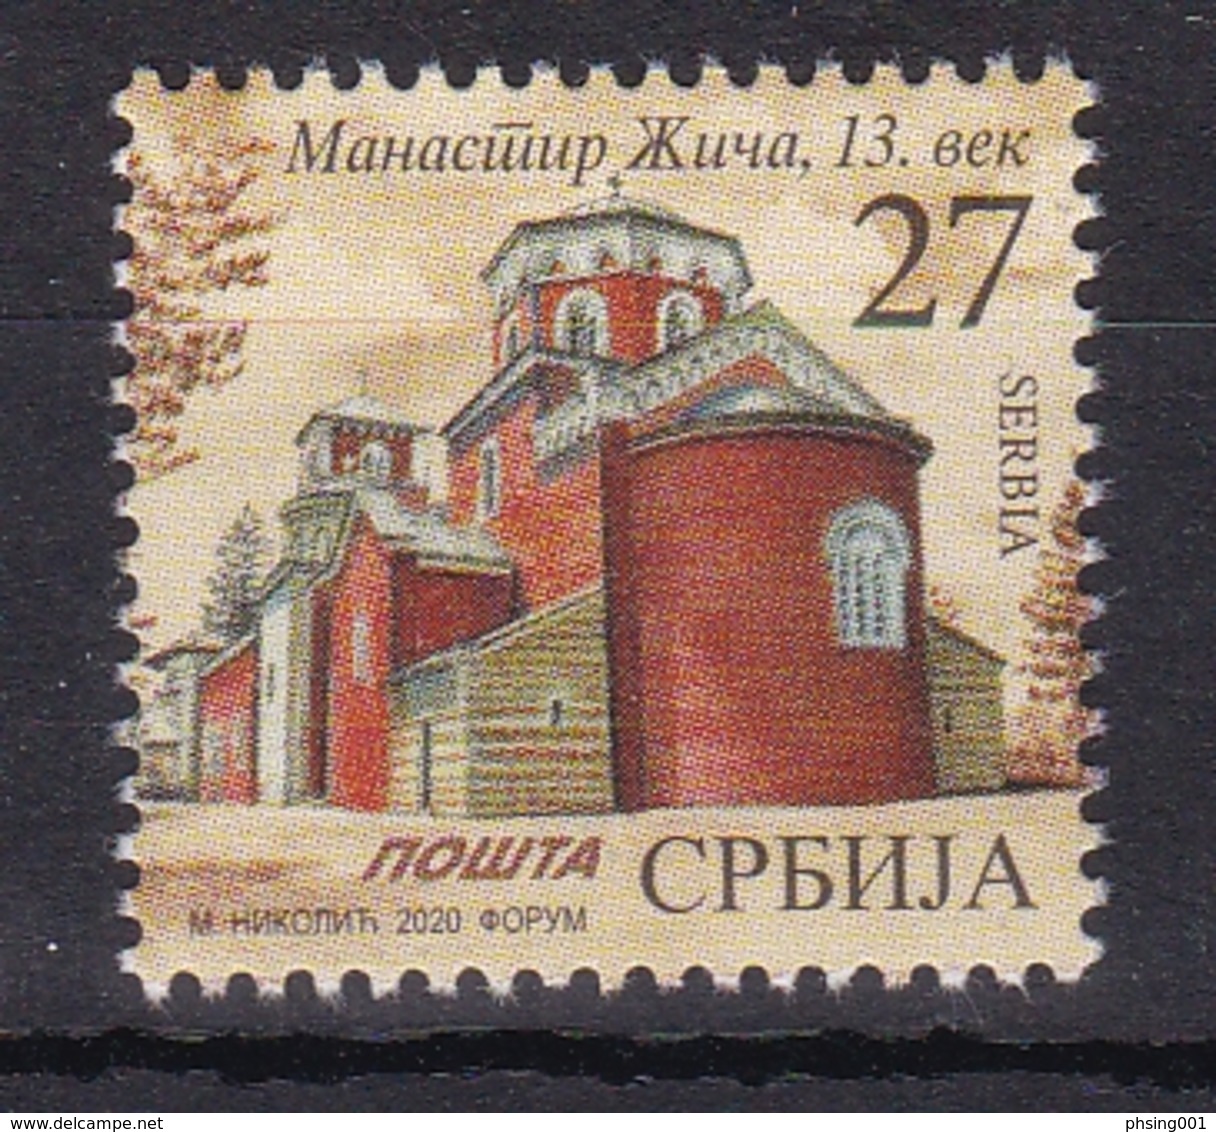 Serbia 2020 Zica Monastery Church Religions Christianity Architecture Definitive Stamp MNH - Serbia